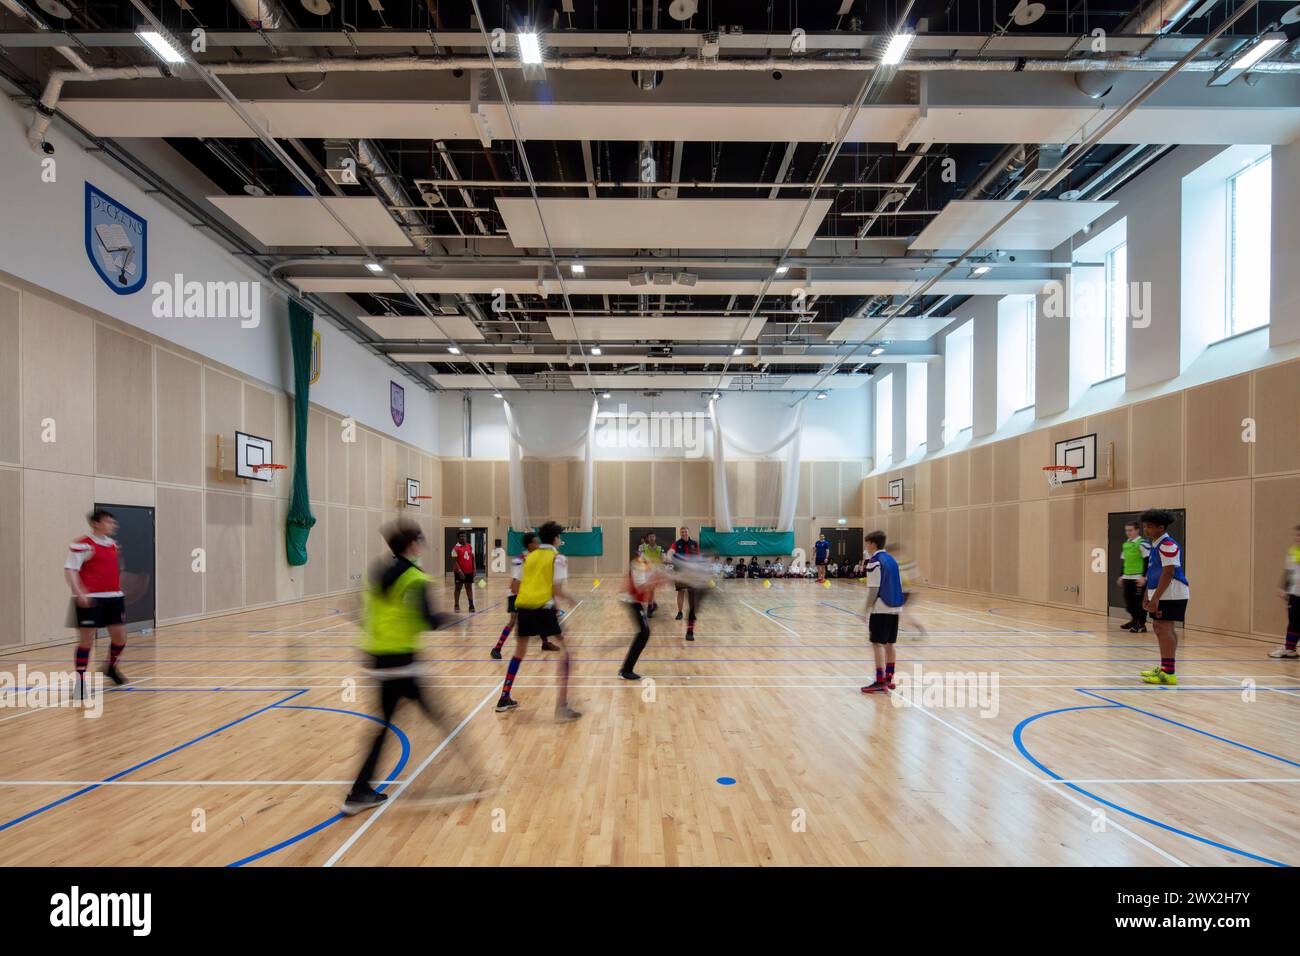 Main hall being used for football. Fulham Boys School, Fulham, United Kingdom. Architect: Architecture Initiative, 2021. Stock Photo